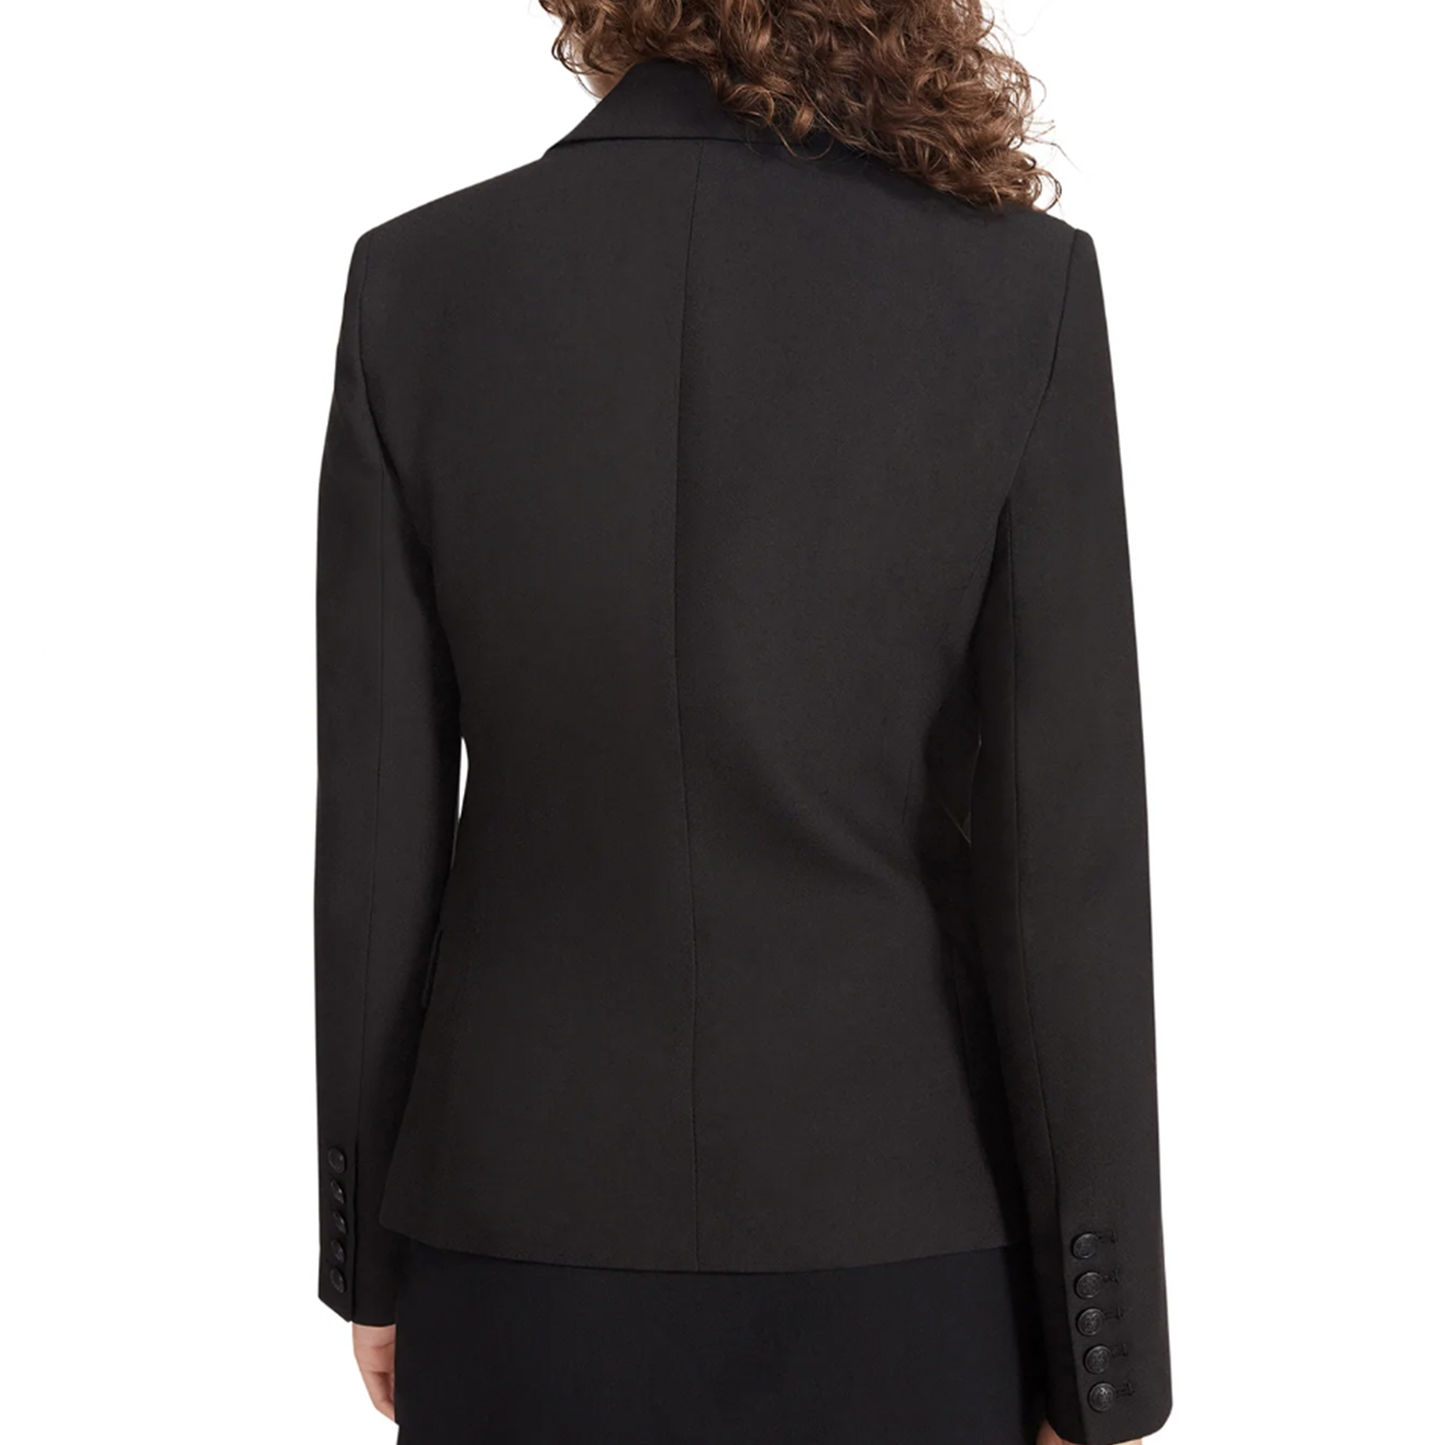 Steve Madden Naomi Blazer. The Naomi is a double breasted blazer that's perfect for adding clean, tailored lines to your look